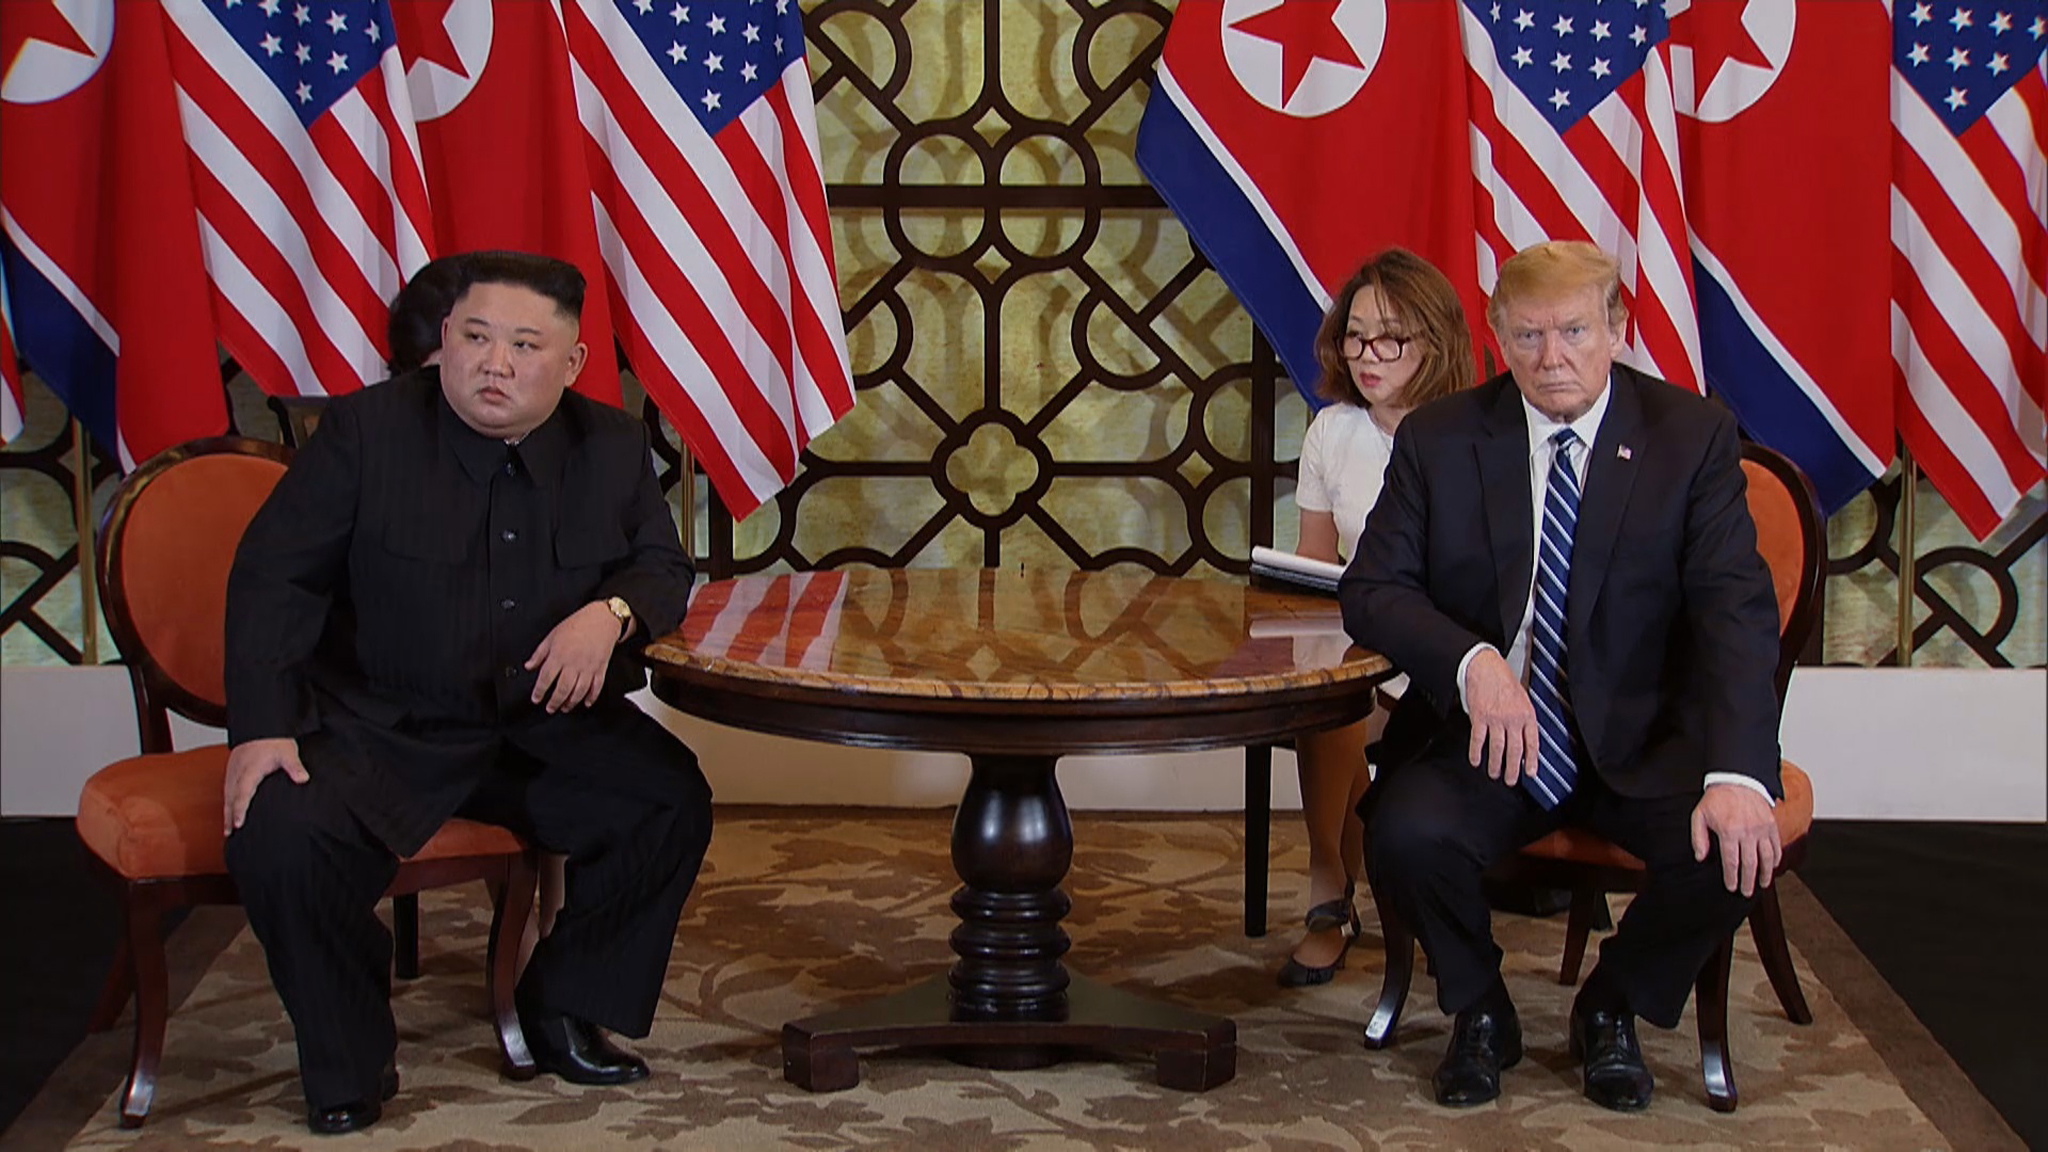 epa07402871 A video grab shows US President Donald J. Trump (R) and North Korean leader Kim Jong-un (L) during the start of their second one on one meeting at the US-North Korea summit in the Sofitel Legend Metropole hotel in Hanoi, Vietnam, 28 February 2019. The second meeting of the US President and the North Korean leader, running from 27 to 28 February 2019, focuses on furthering steps towards achieving peace and complete denuclearization of the Korean peninsula.  EPA/HOST BROADCAST / POOL